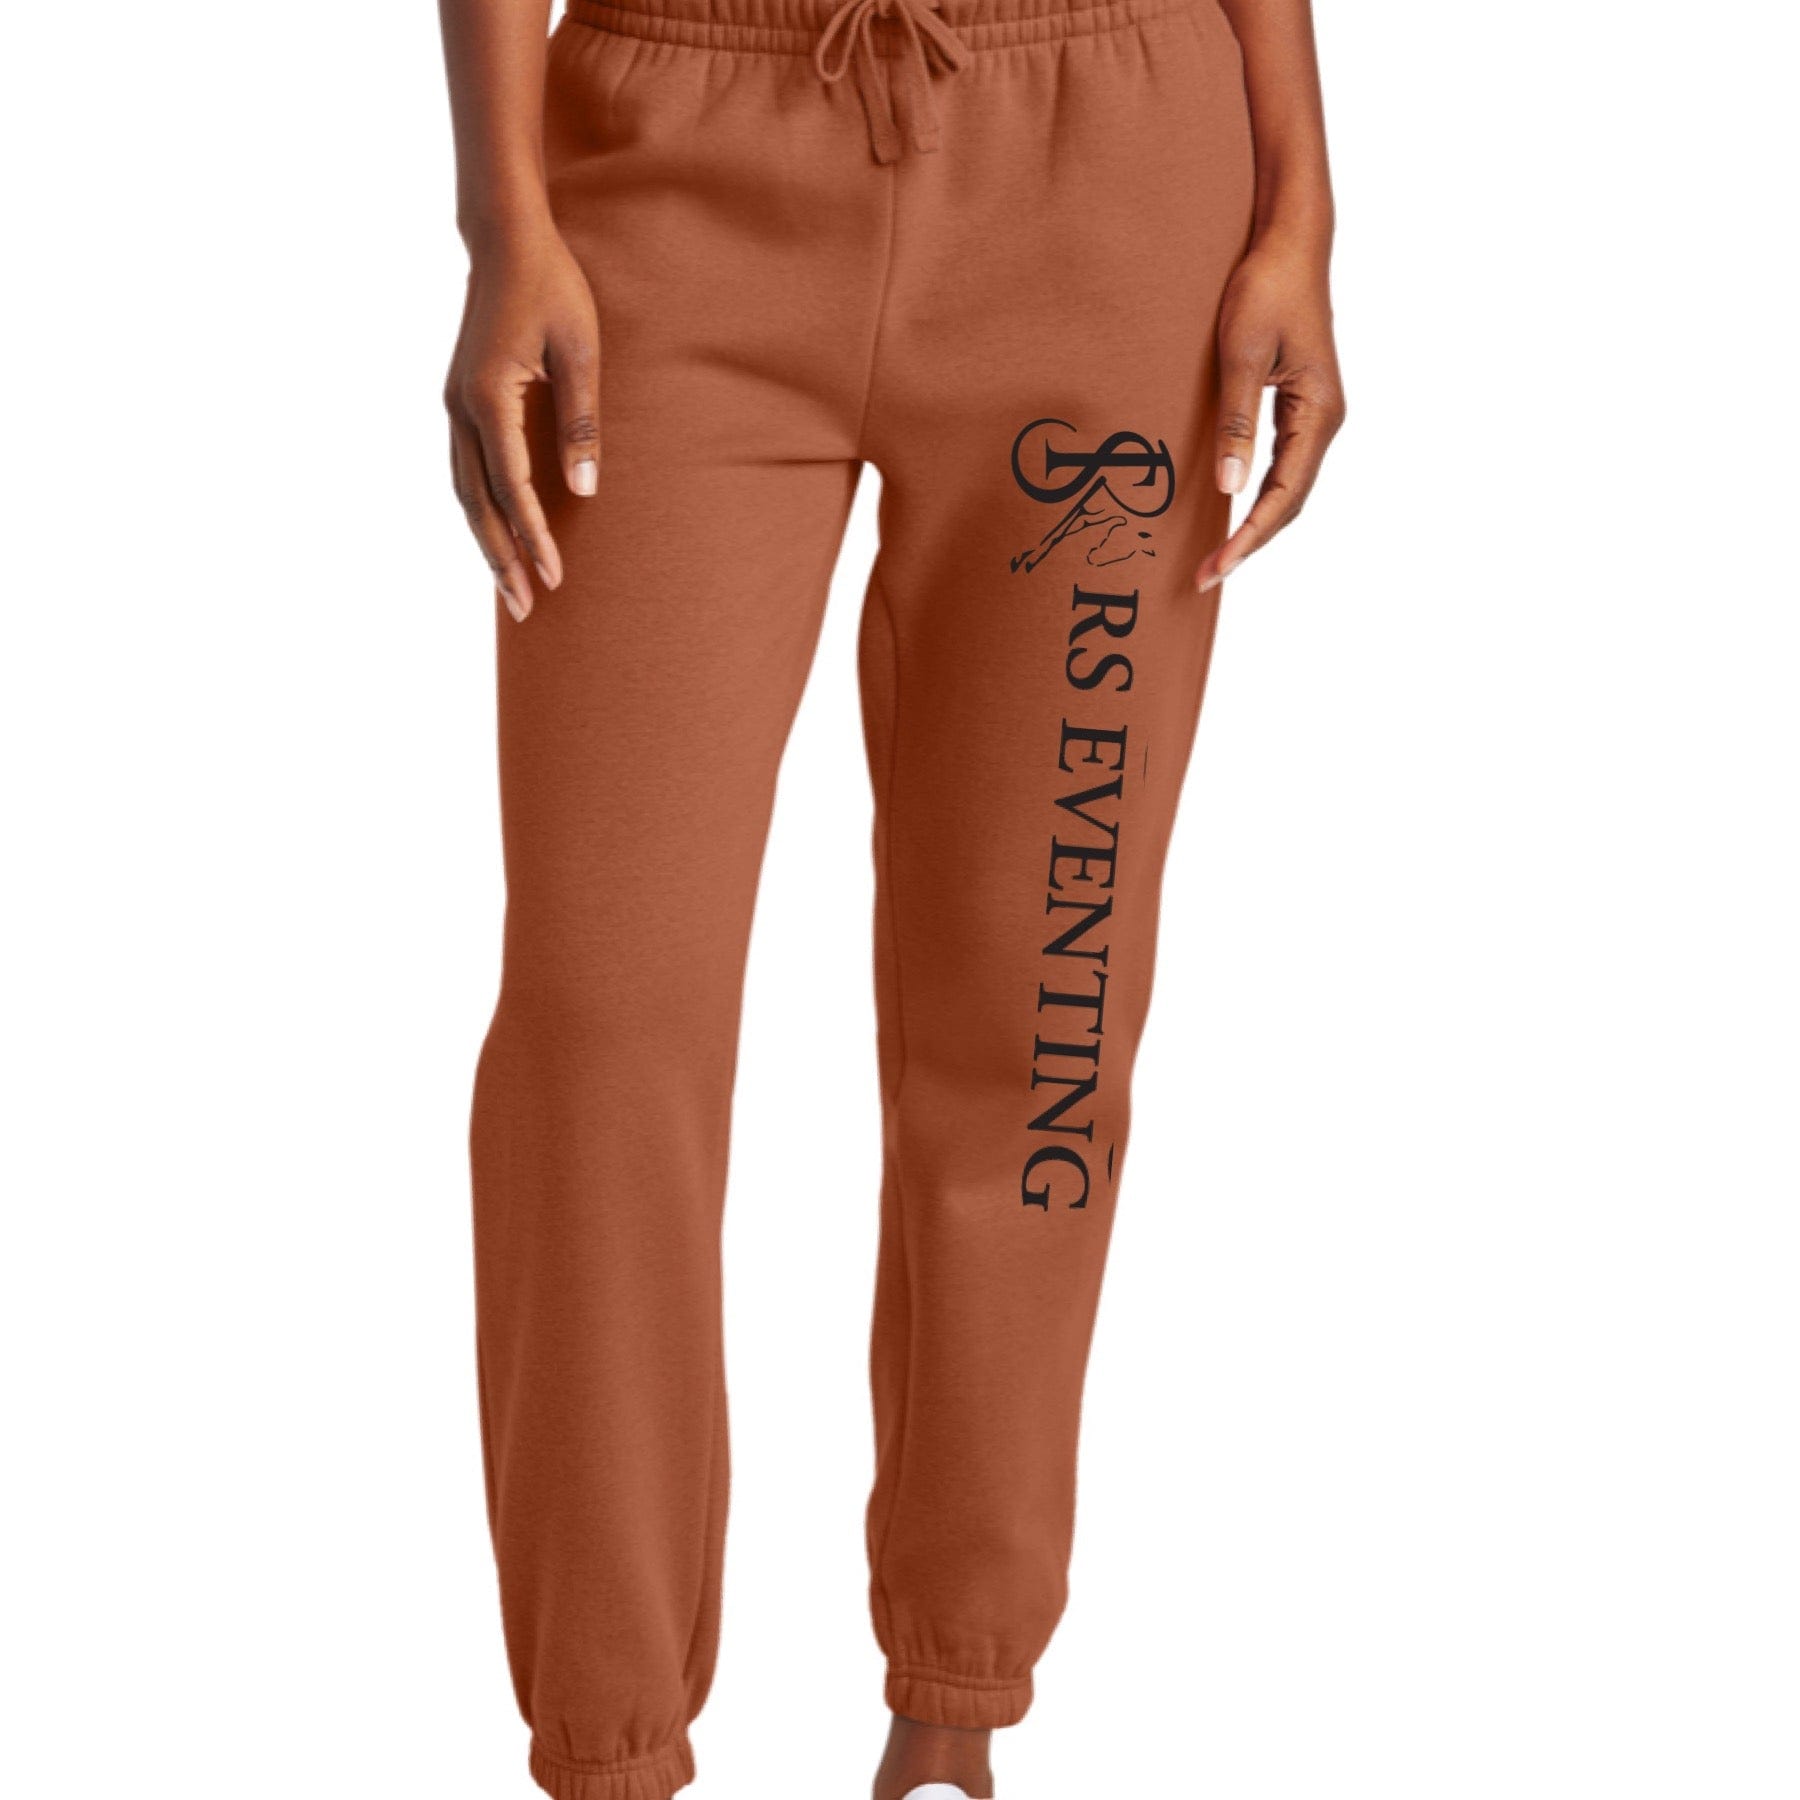 Equestrian Team Apparel RS Eventing Sweat Pants equestrian team apparel online tack store mobile tack store custom farm apparel custom show stable clothing equestrian lifestyle horse show clothing riding clothes horses equestrian tack store